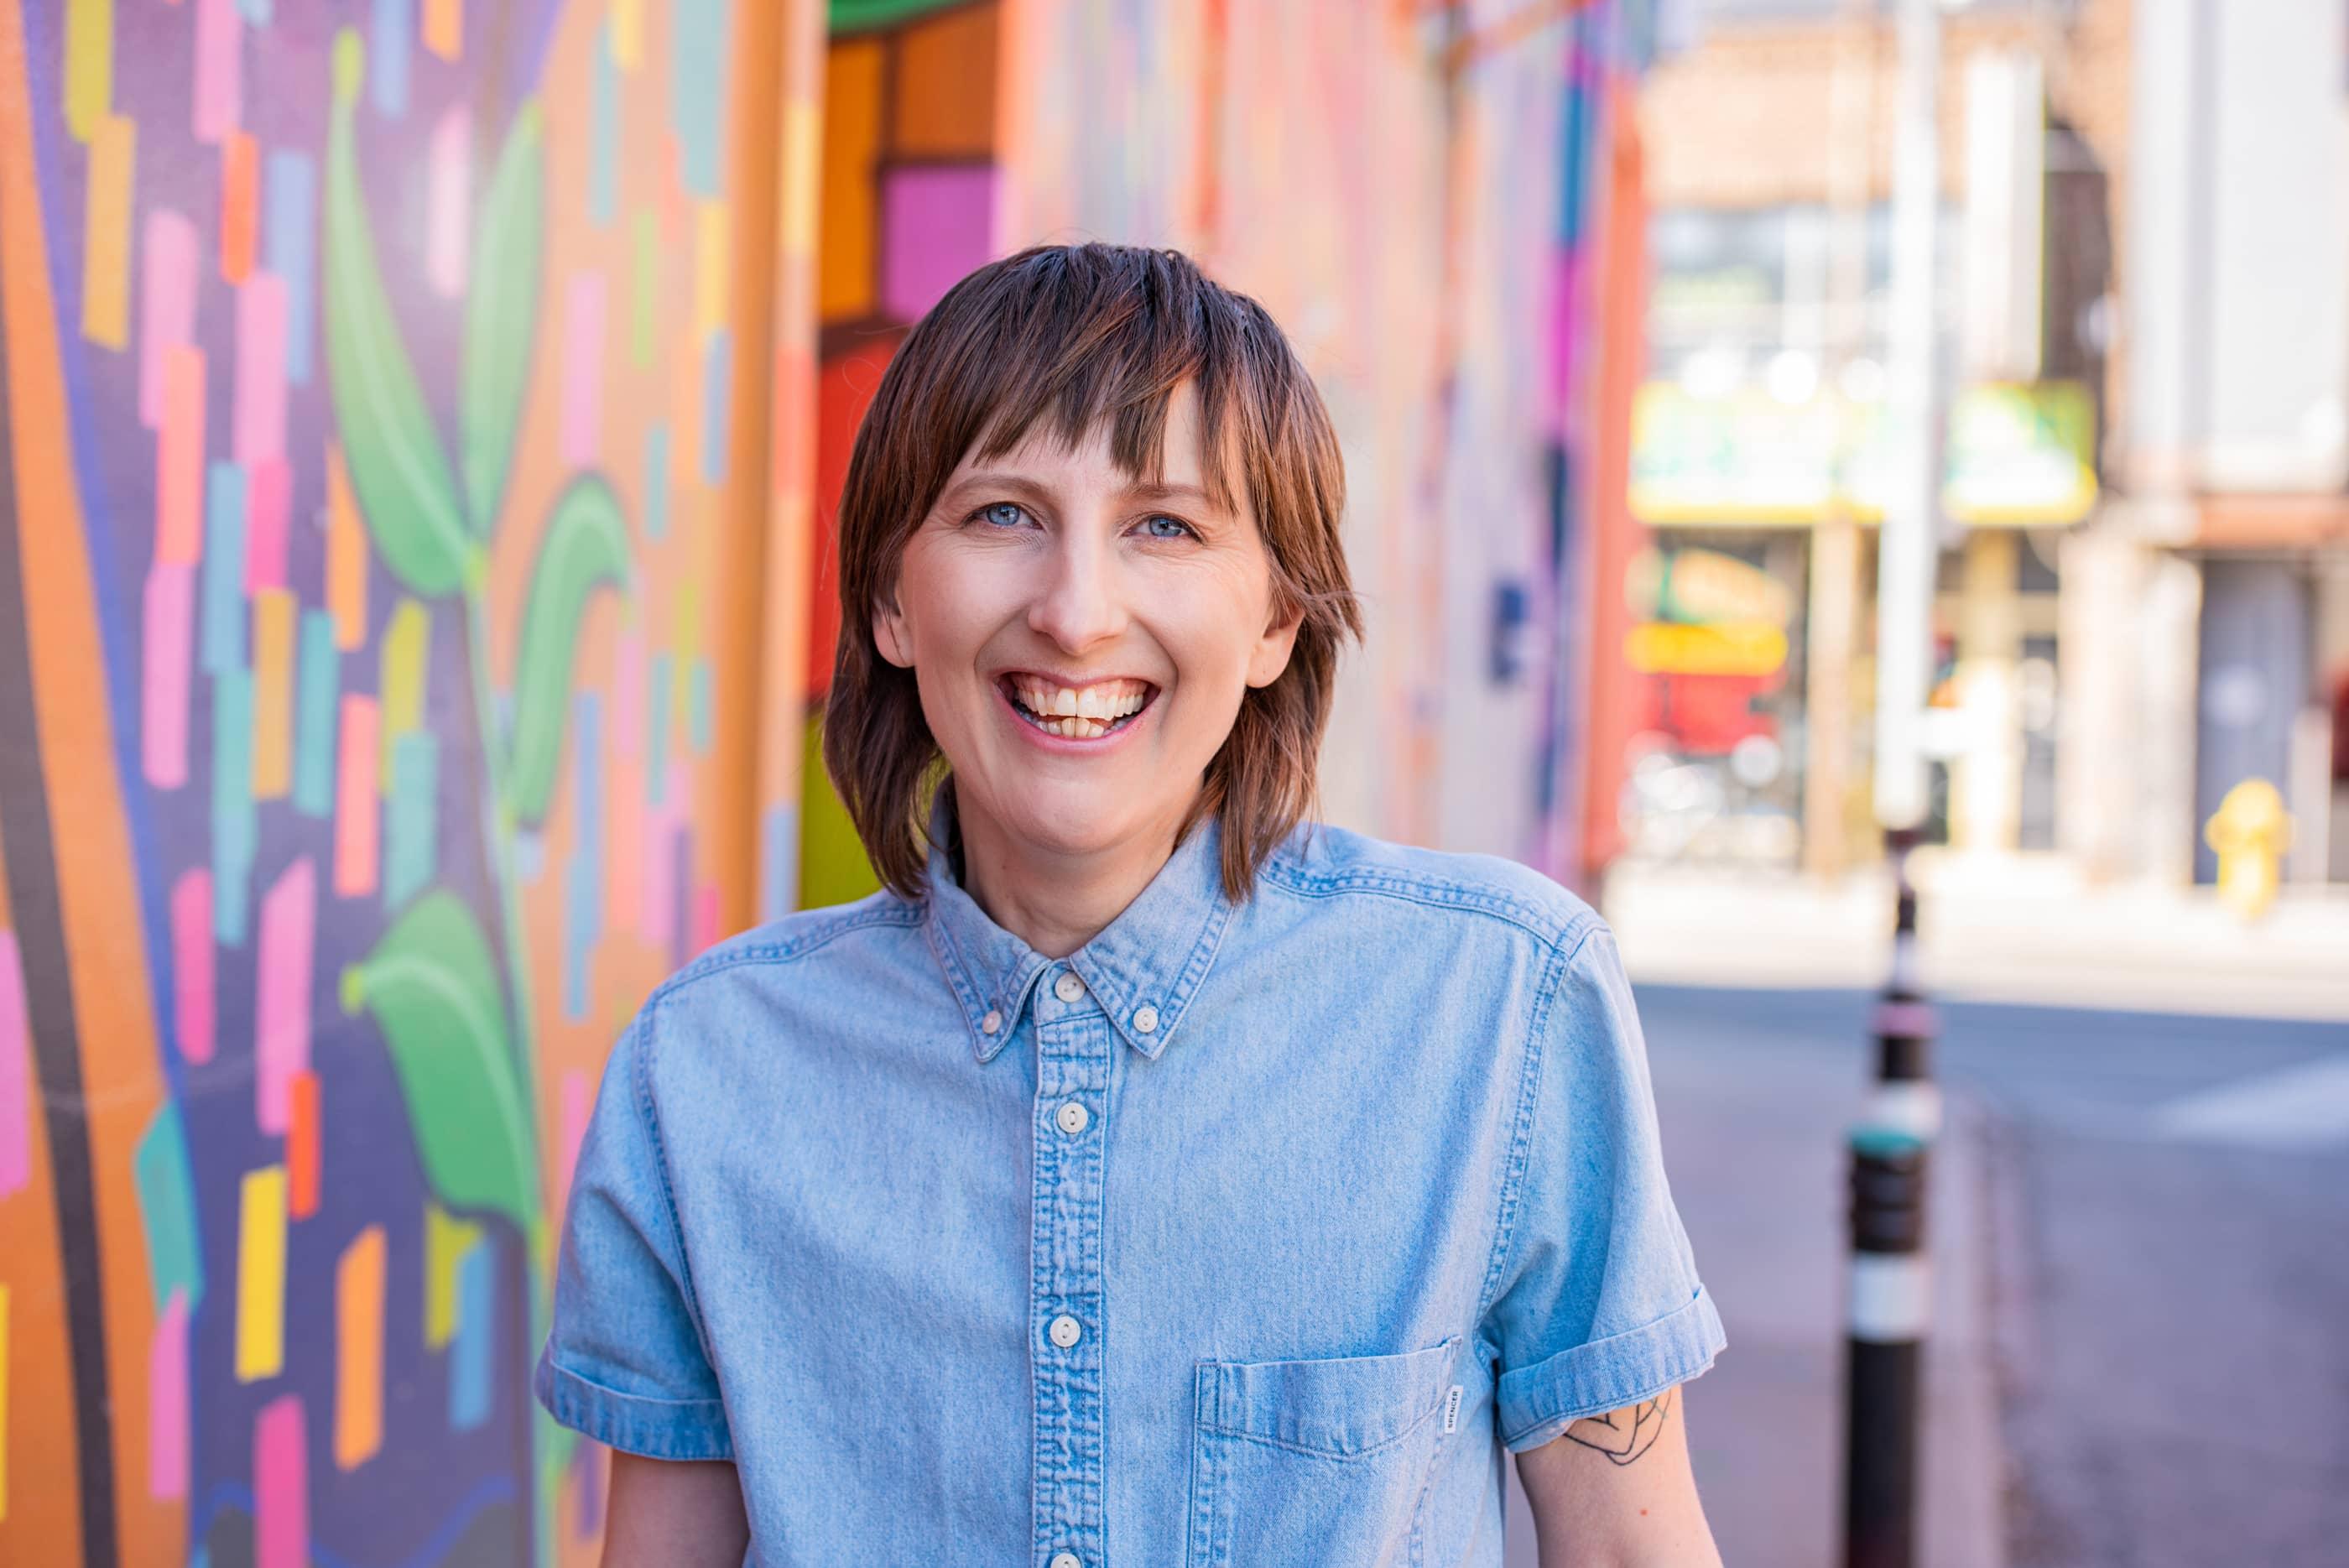 Nicole wearing a blue button down shirt smiling on a street with a colourful mural in the background